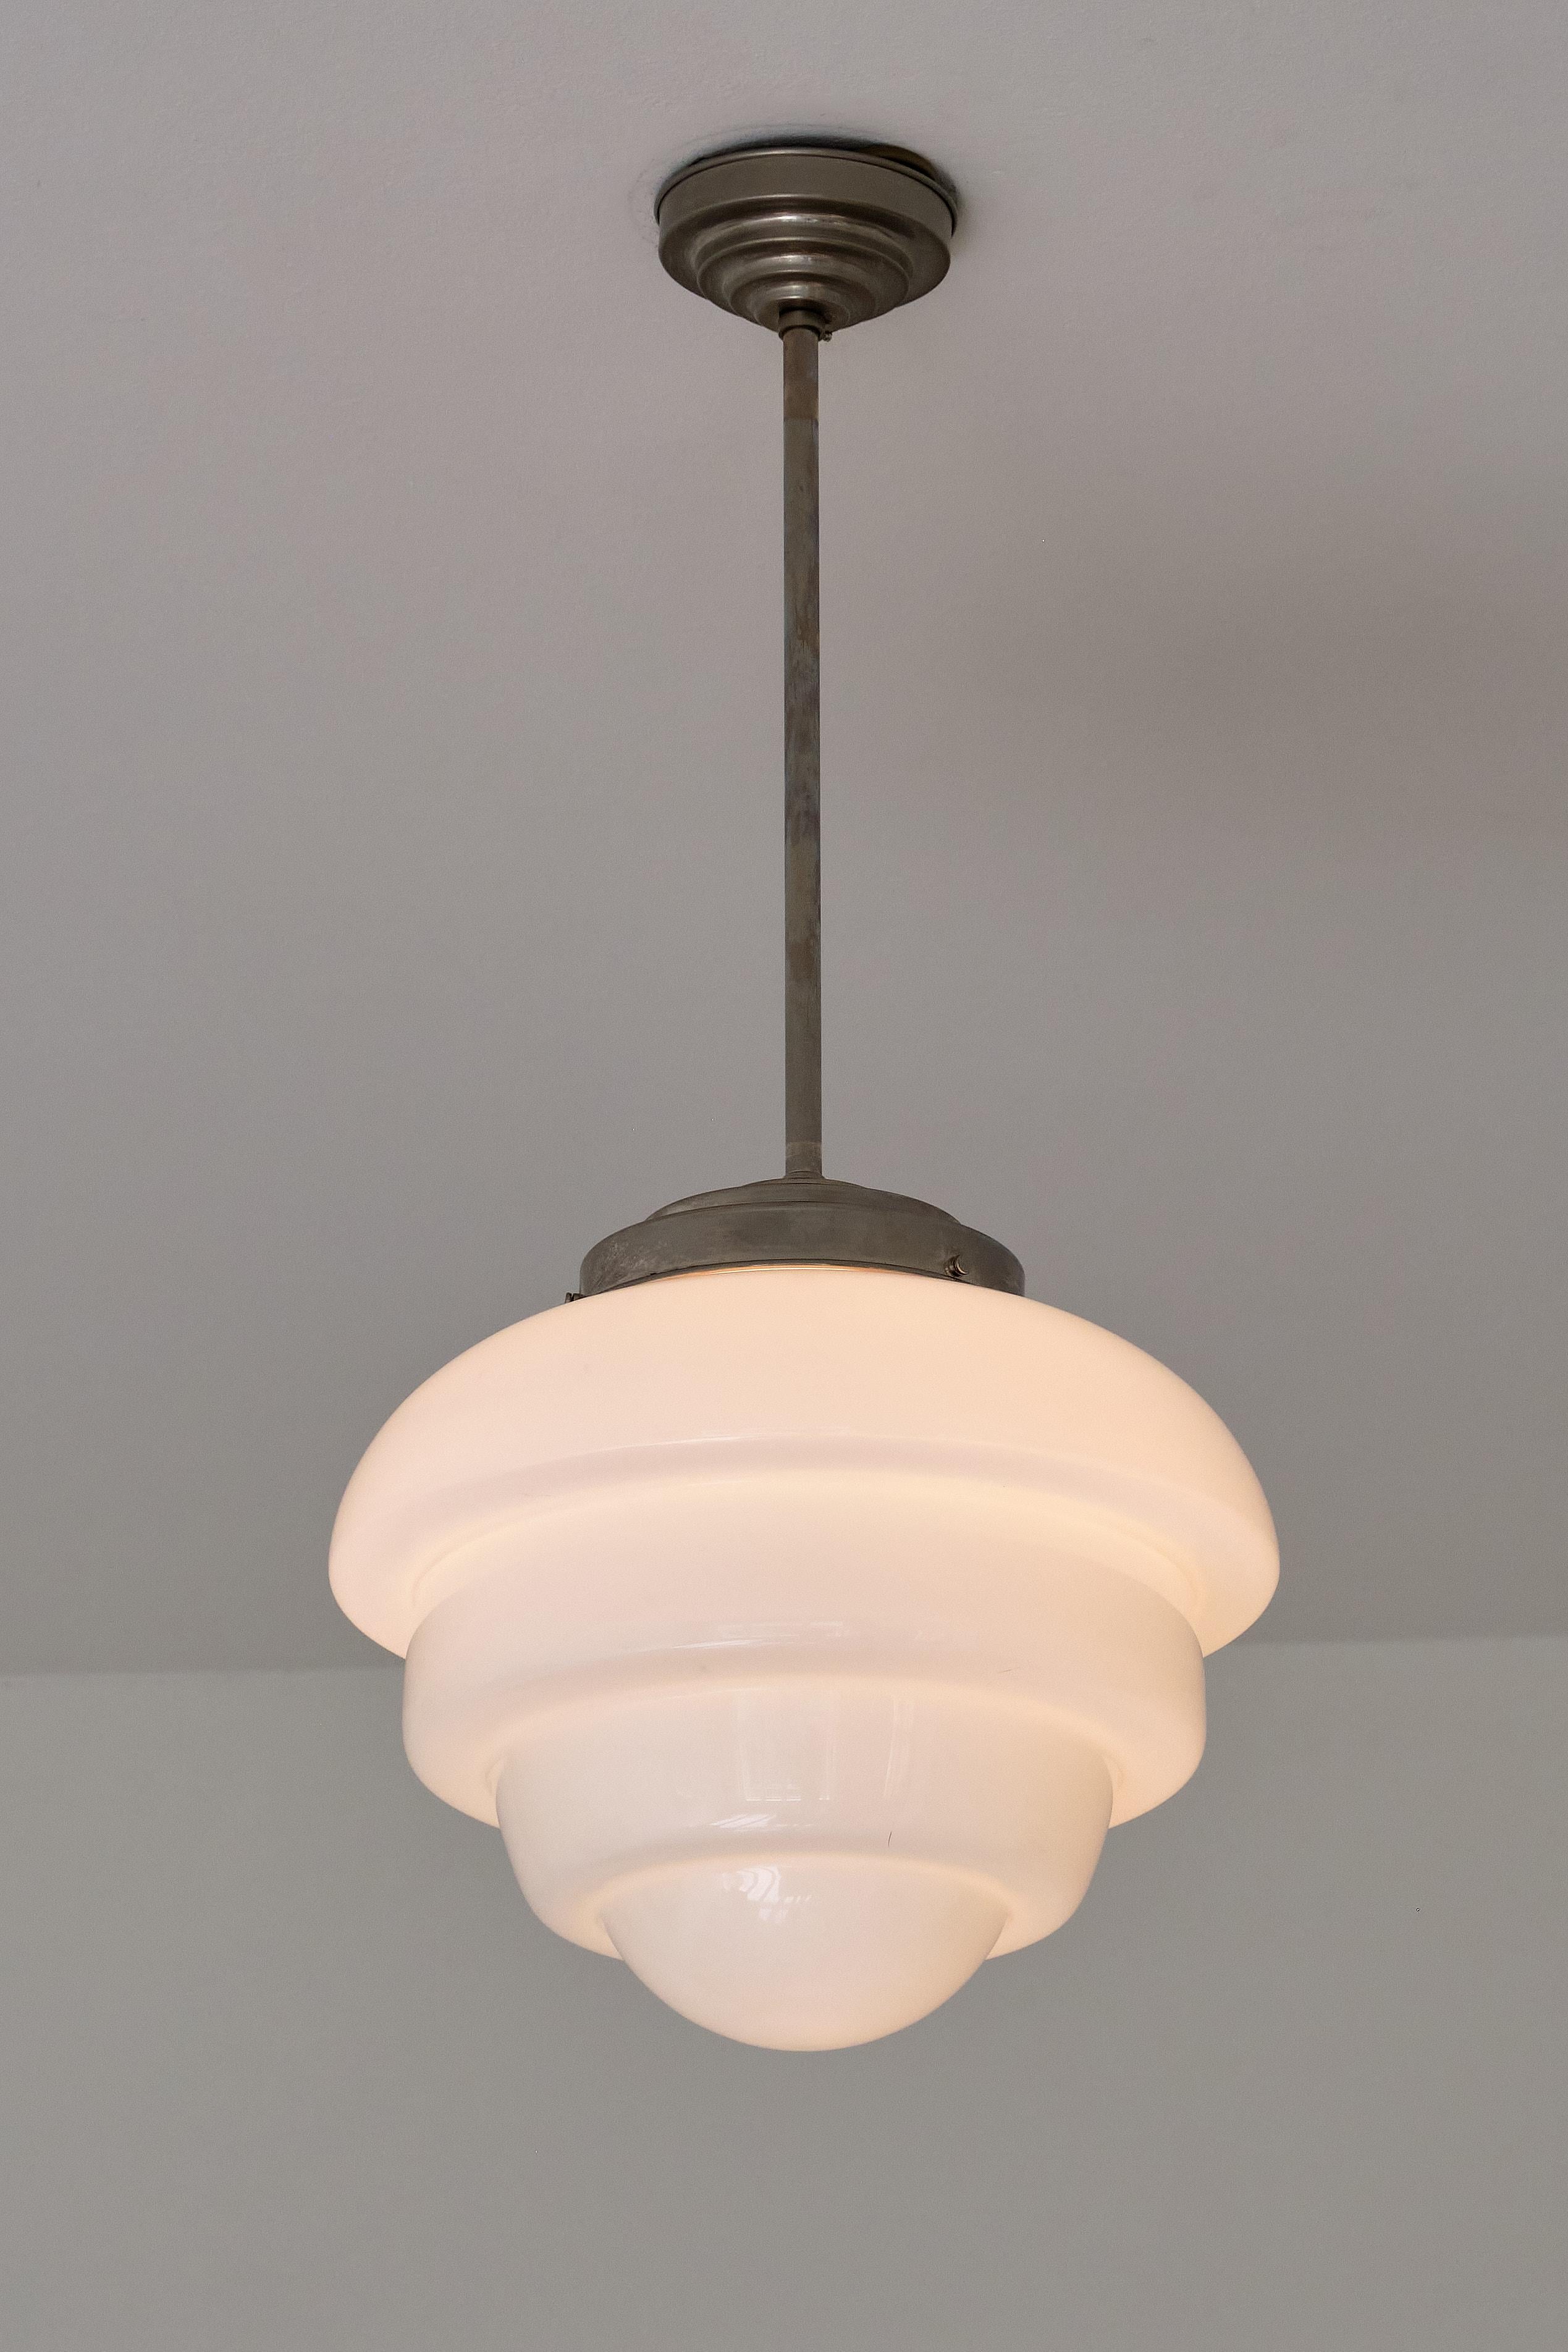 Mid-20th Century Art Deco 'Artichoke' Pendant Light in Opal Glass and Nickel, Netherlands, 1930s For Sale